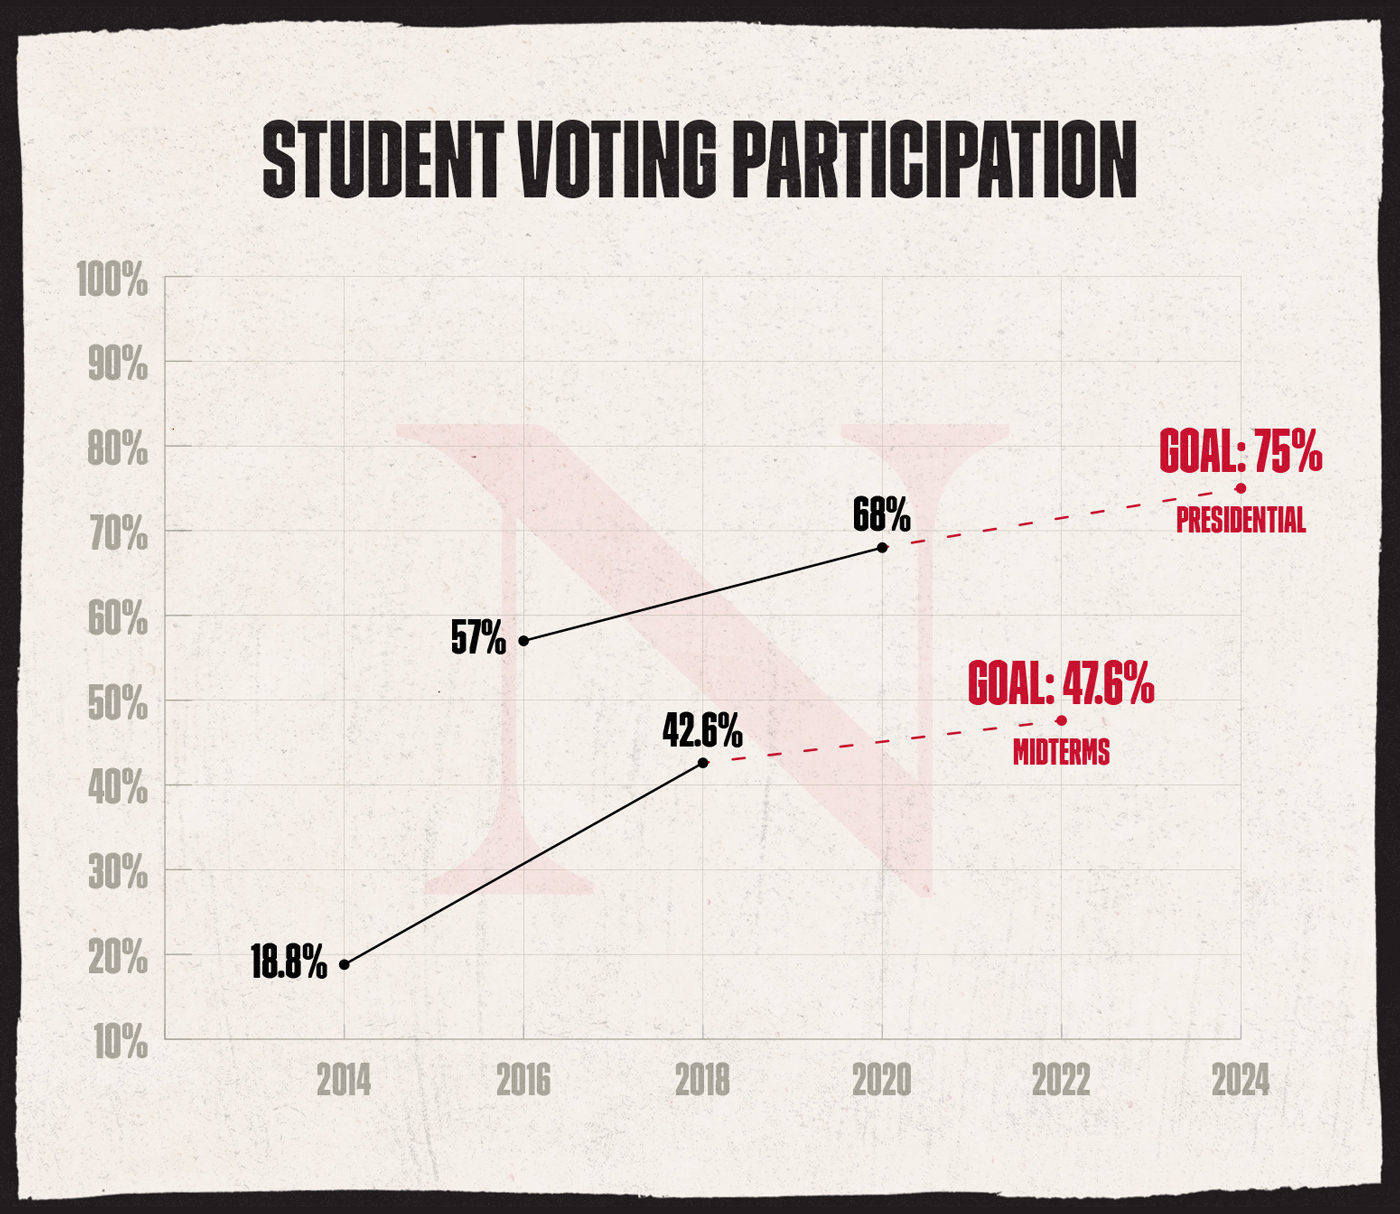 Graph showing student voting participation. Presidential: 2016 - 57%; 2020 - 68%; 2024 Goal - 75%. Midterms: 2014 - 18.8%; 2018 - 42.6%; 2022 Goal - 47.6%.